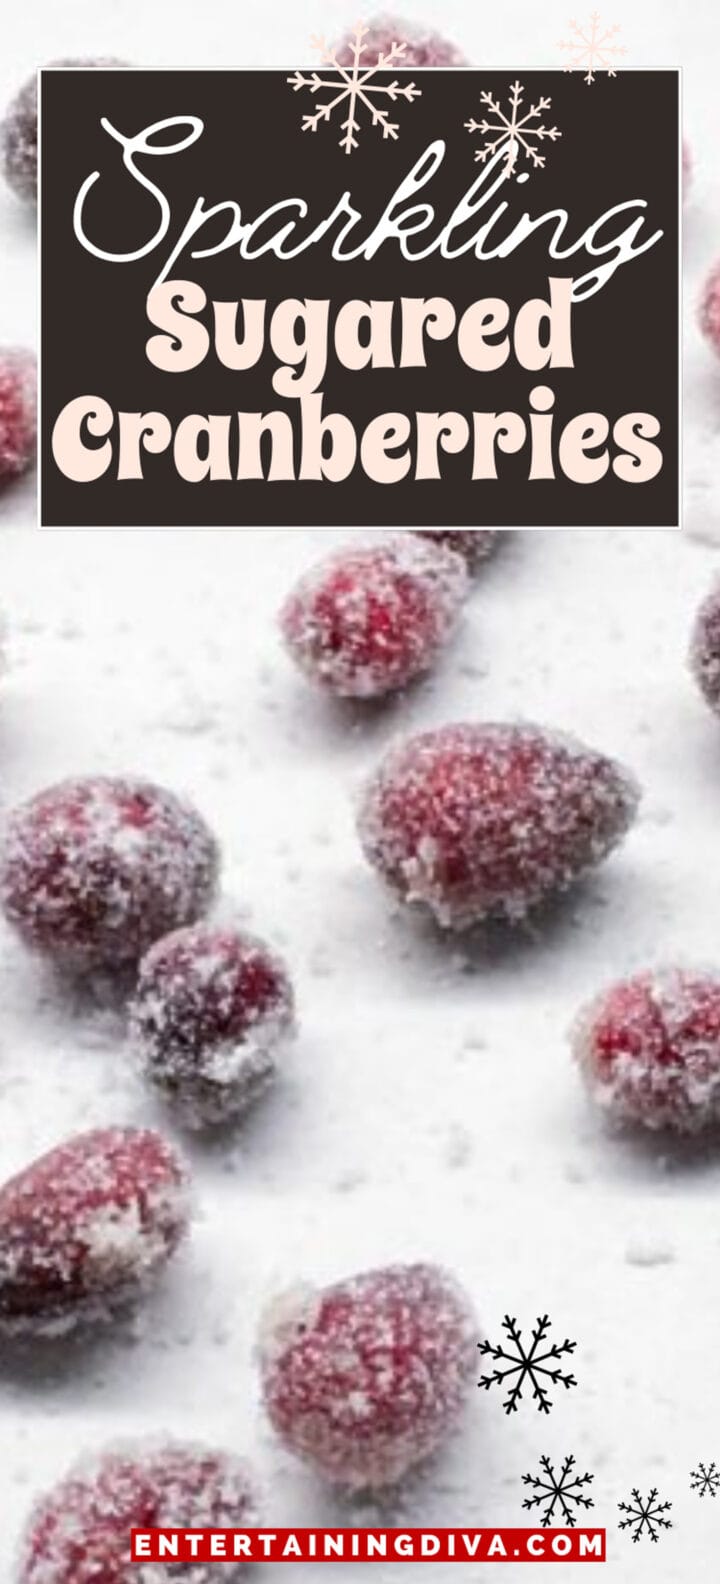 Sparkling Sugared Cranberries With Maple Syrup